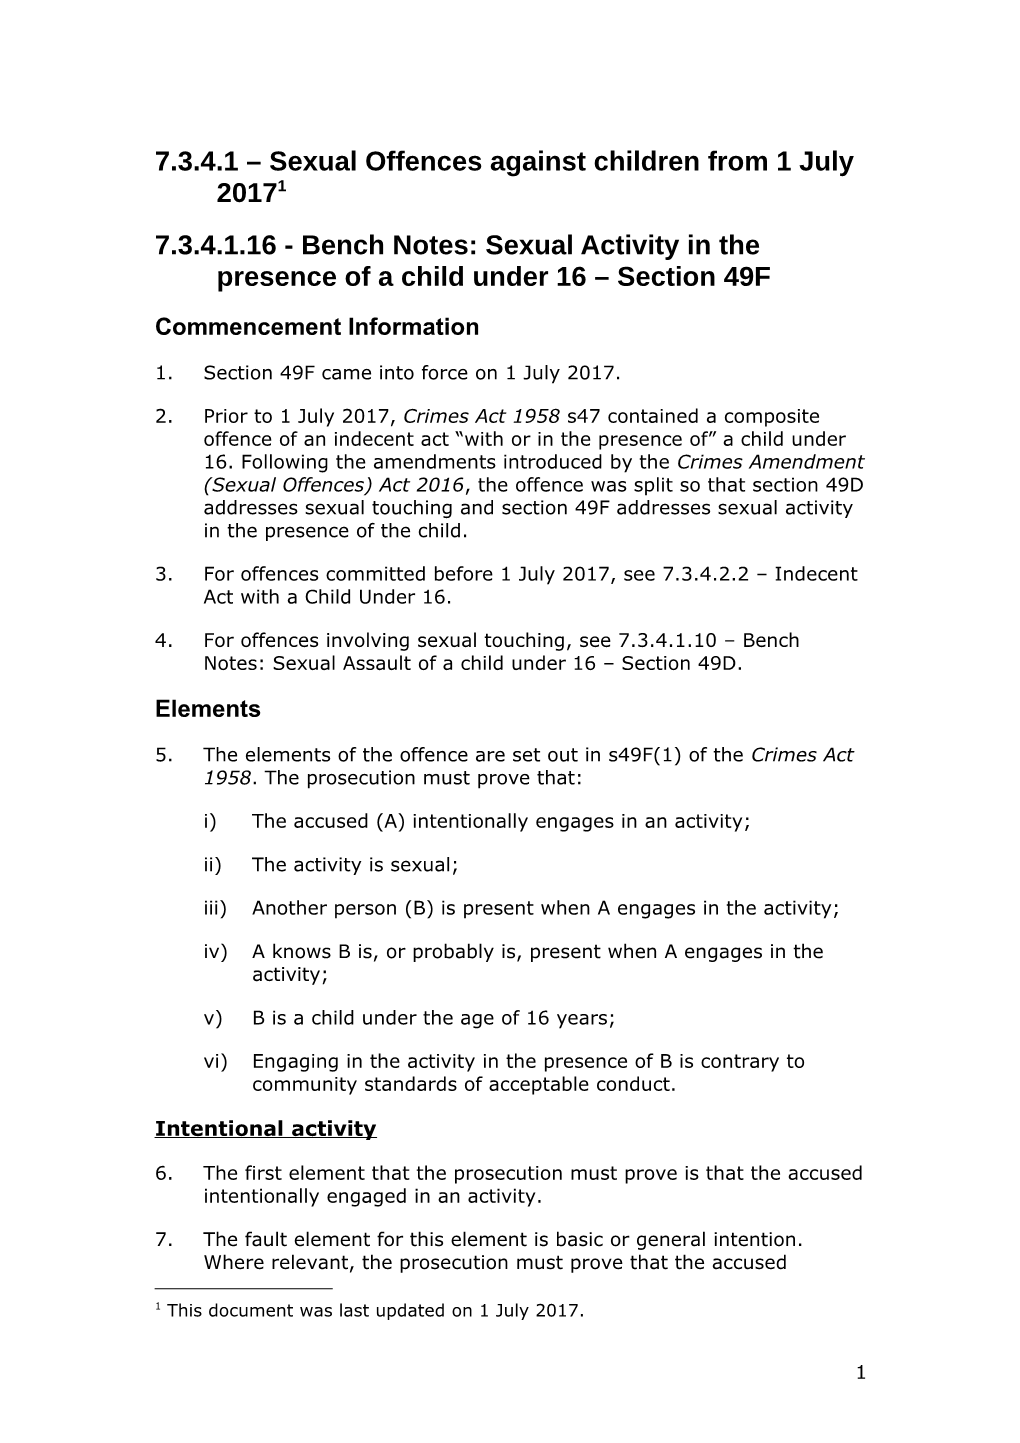 7.3.4.1.16 - Bench Notes: Sexual Activity in the Presence of a Child Under 16 Section 49F